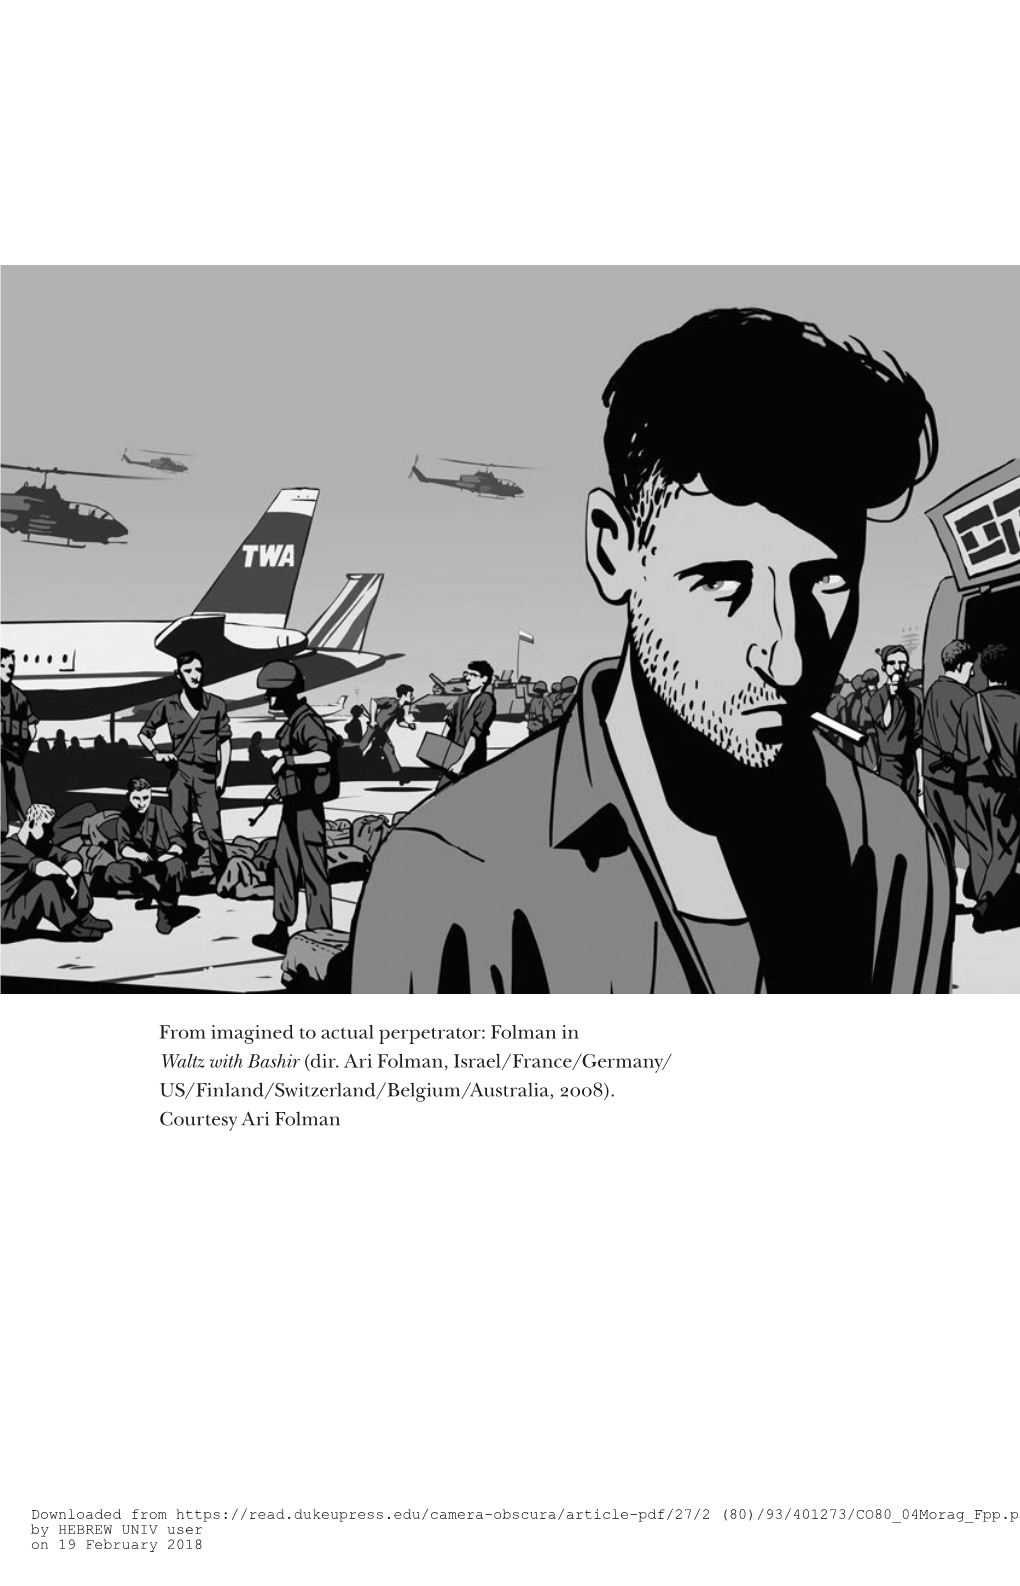 From Imagined to Actual Perpetrator: Folman in Waltz with Bashir (Dir